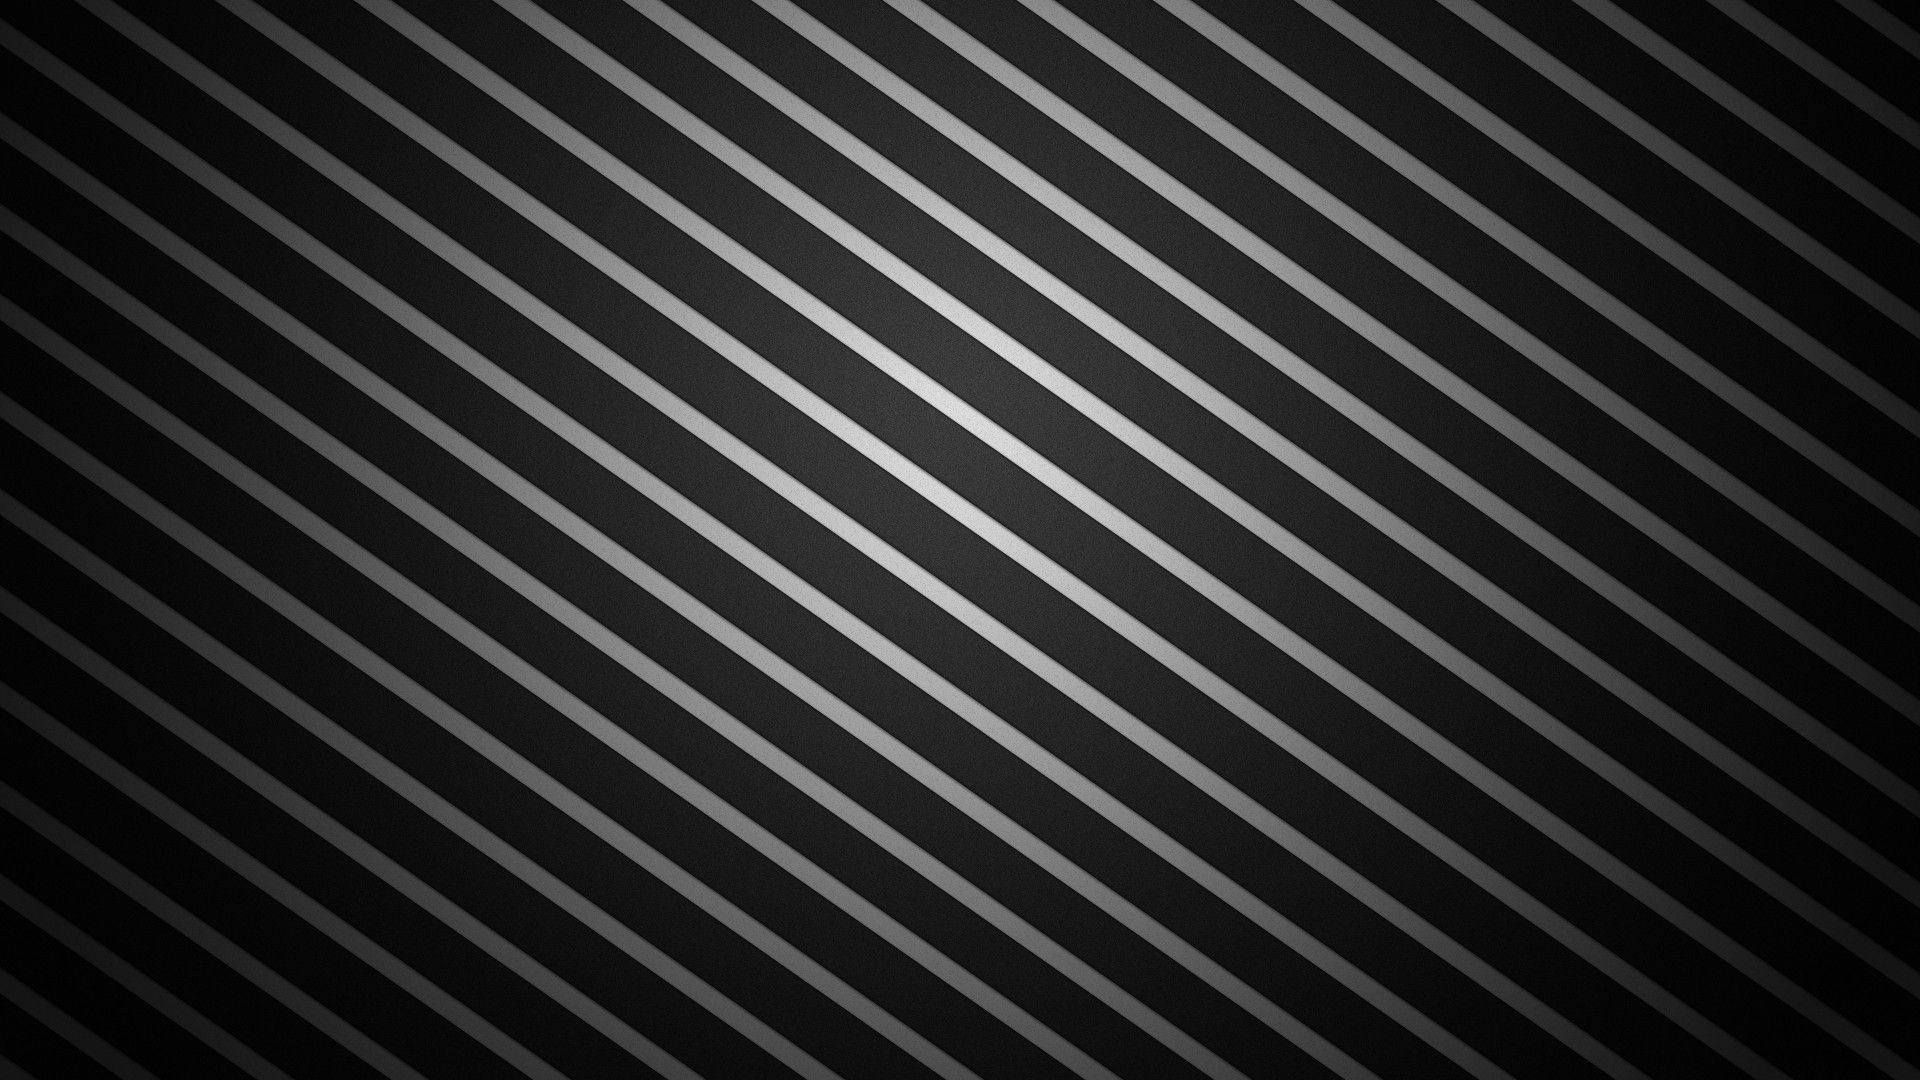 Abstract black white line wallpaper, Stylish simplicity, Contrasting elements, Modern texture, 1920x1080 Full HD Desktop